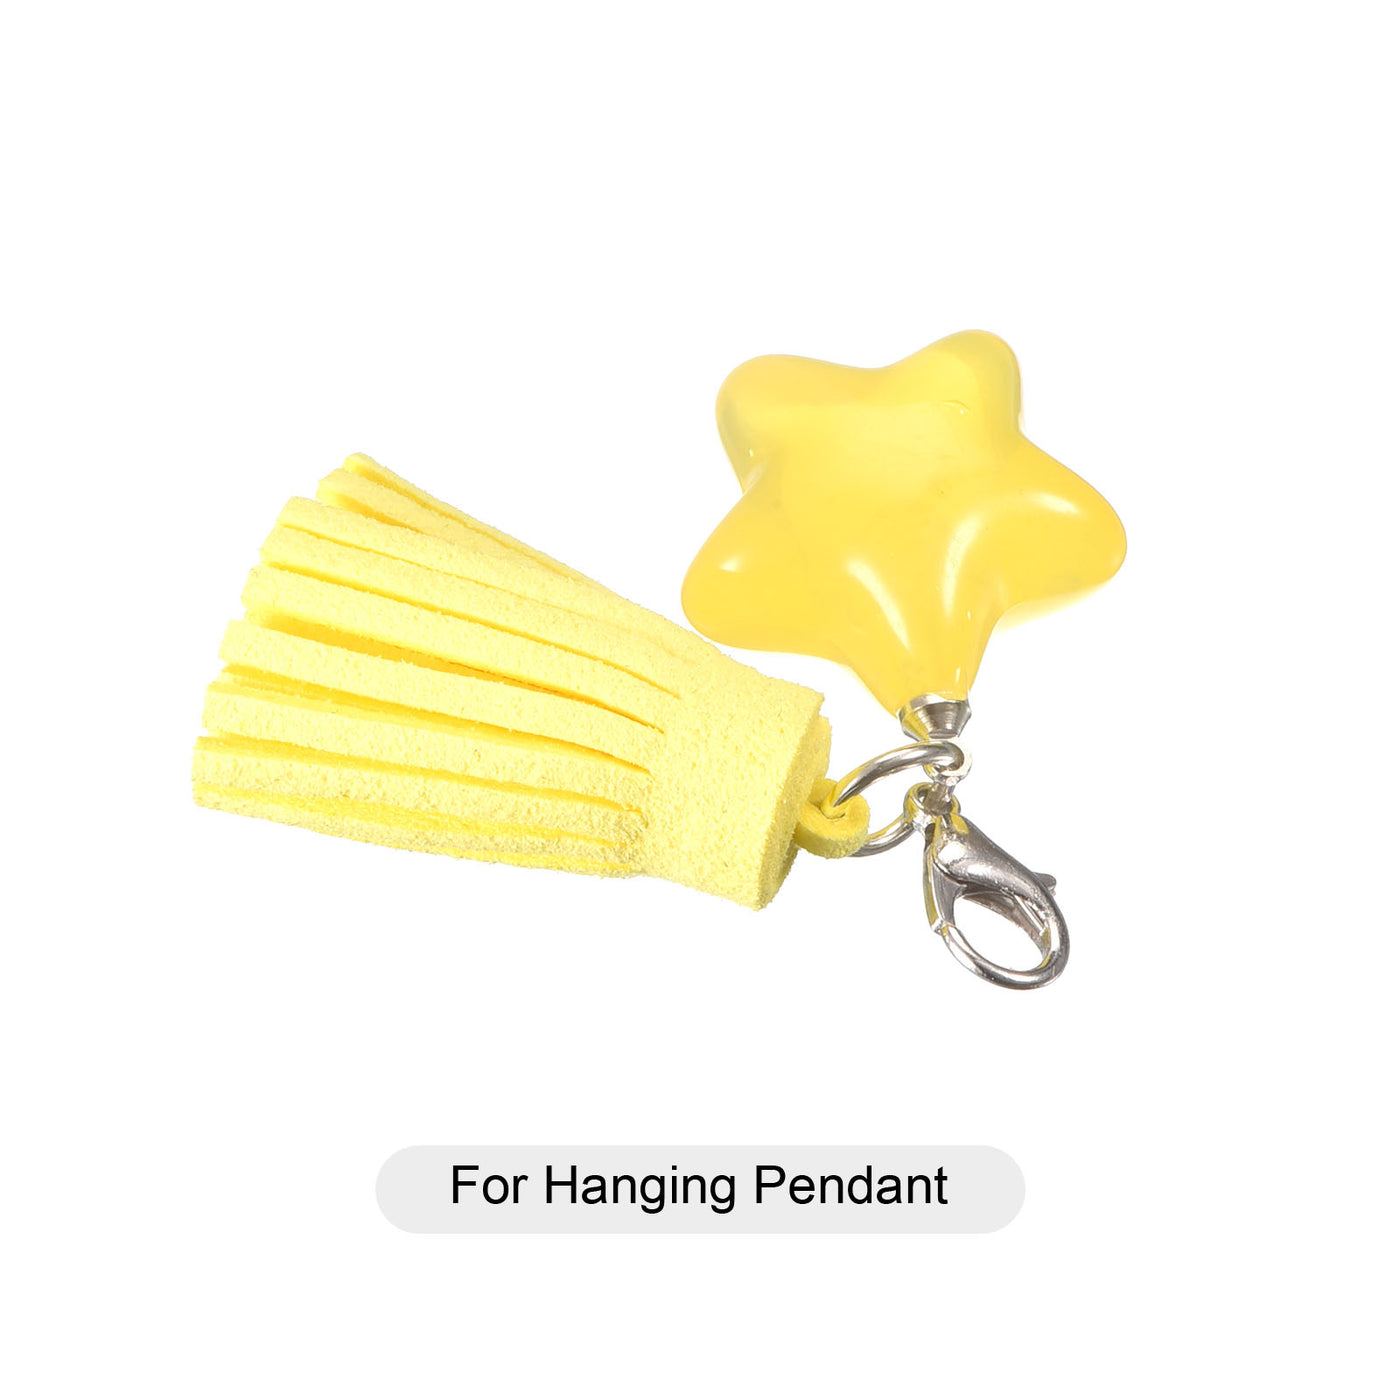 Harfington Star Bead Pendants with Charm Loop for Jewelry Making Craft, 4Pcs Yellow